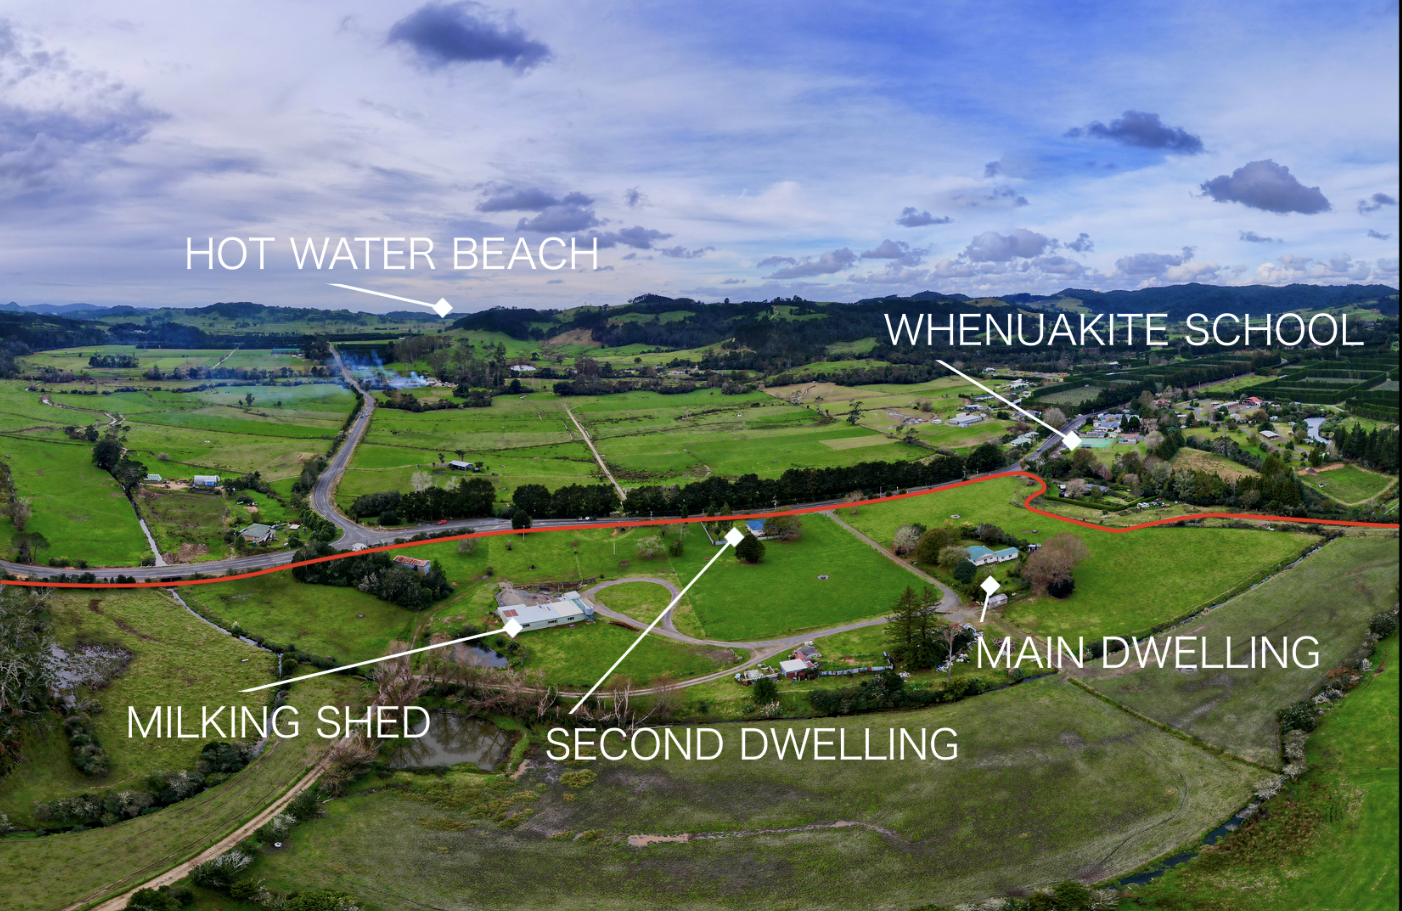 1093 Tairua Whitianga Road A Versatile 48-hectare Farm located in the Picturesque Whenuakite For Sale